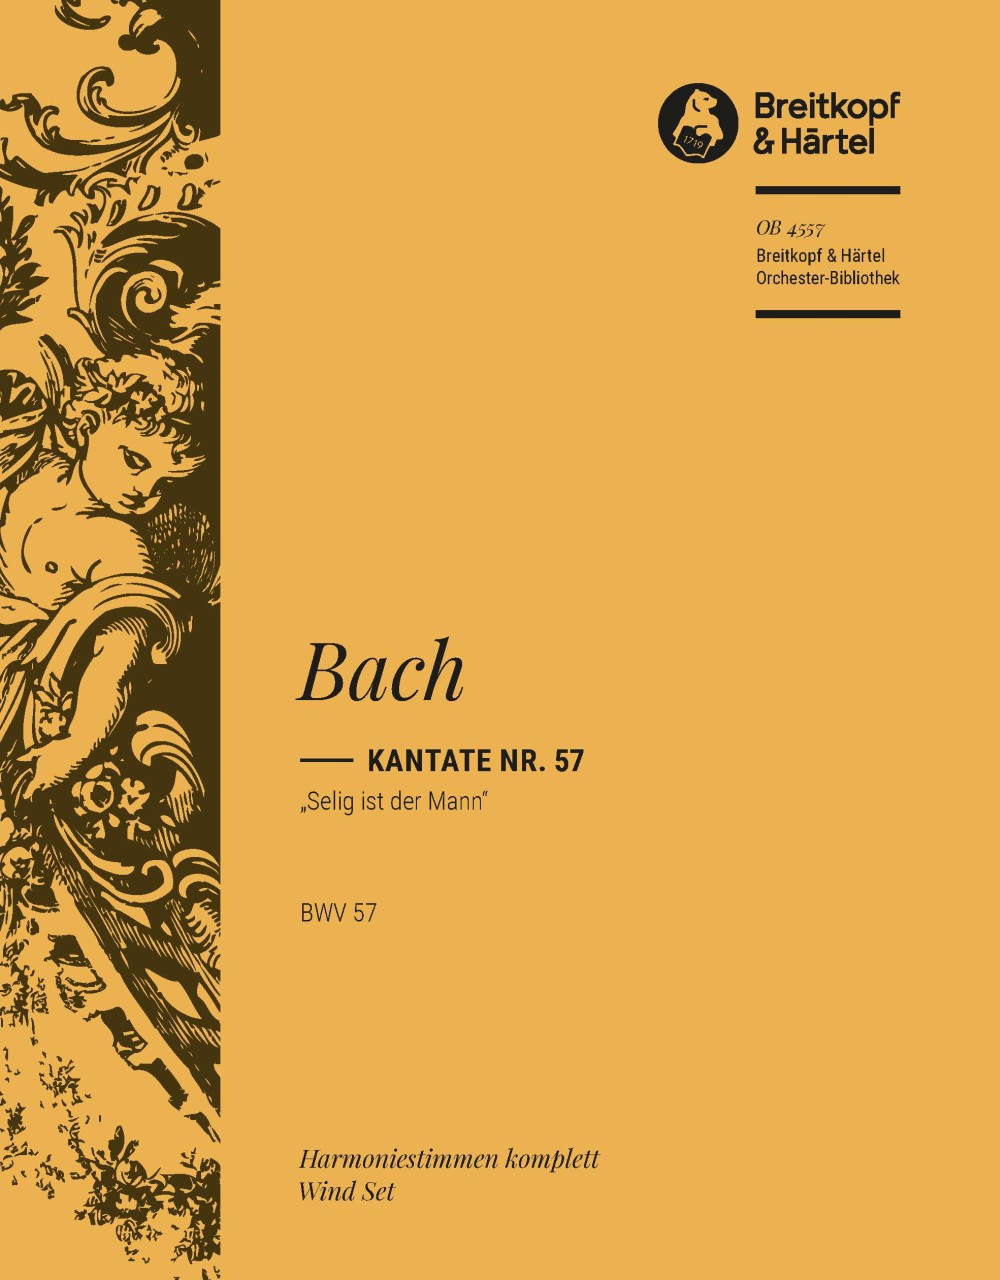 2nd　Ficks　Christma　for　of　the　Day　Mann,　ist　Cantata　57　BWV　der　Selig　Bach:　Music